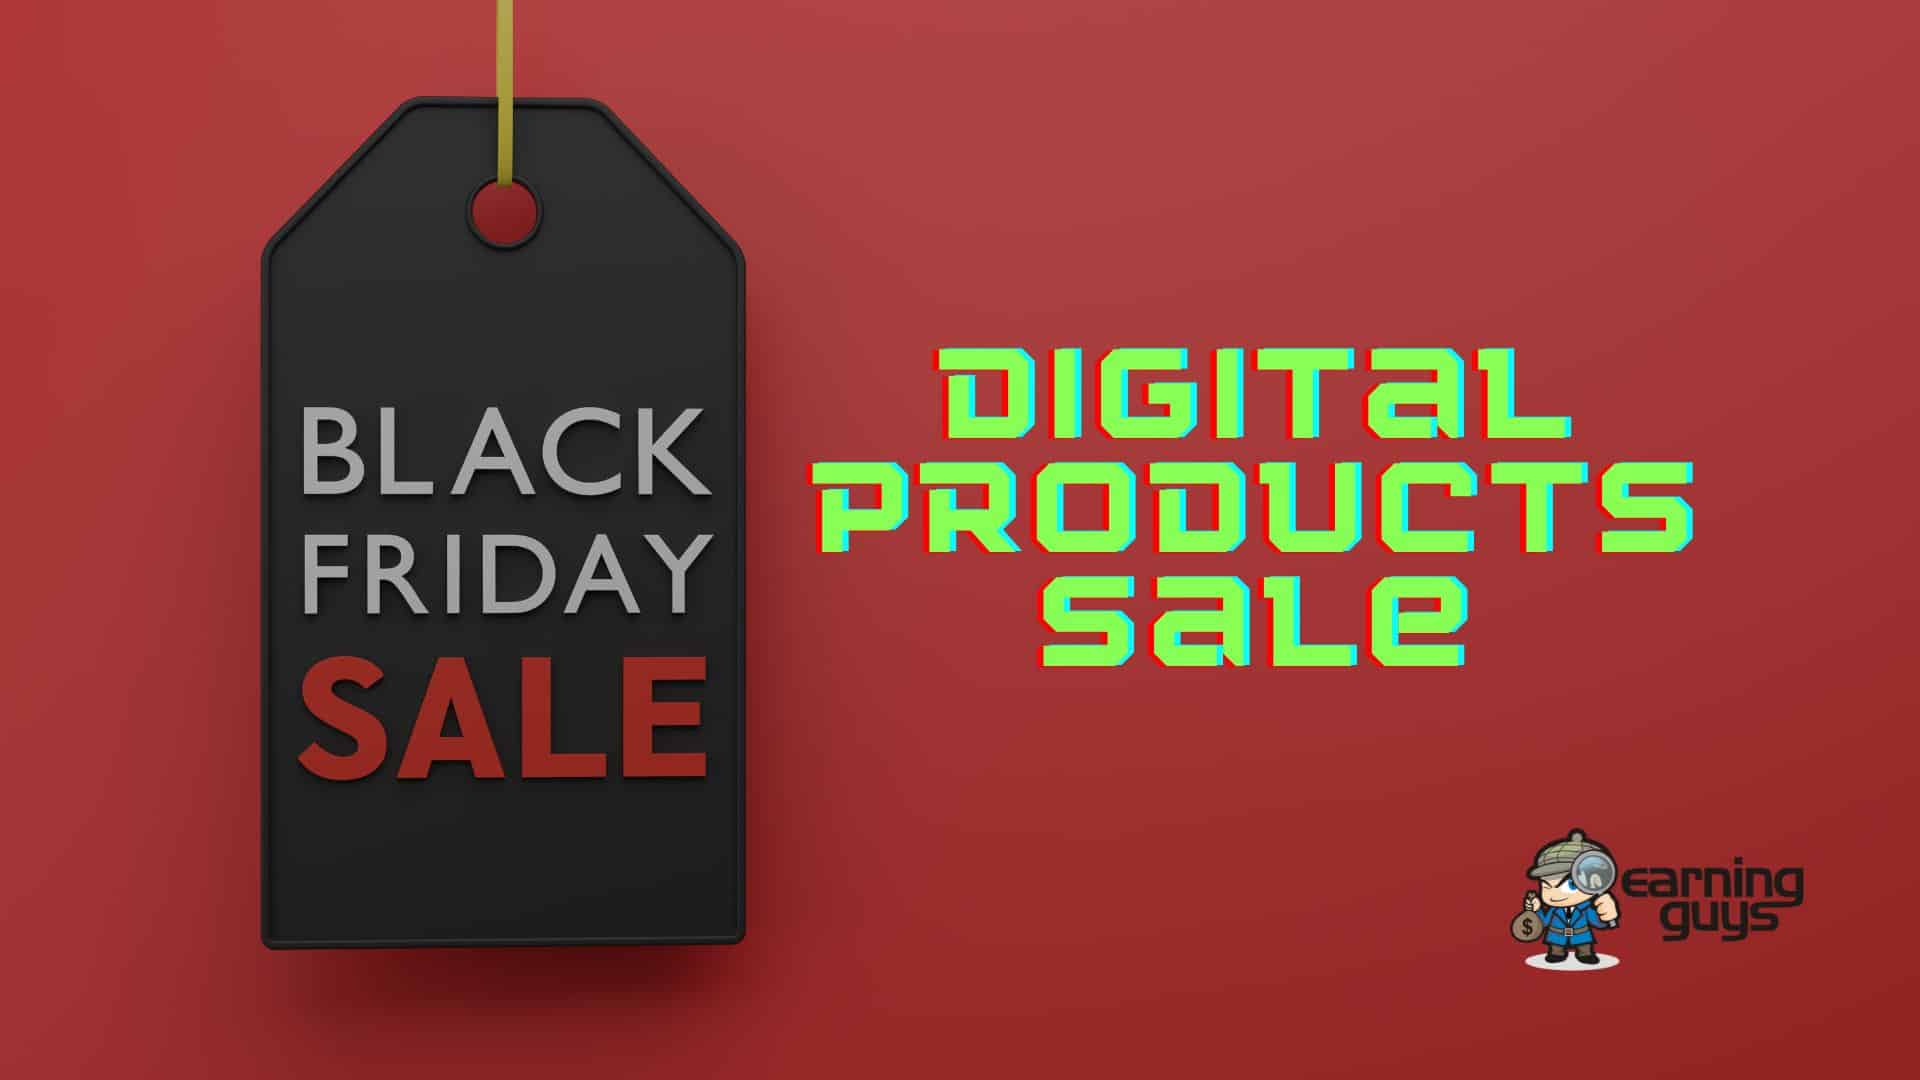 Black Friday and Cyber Monday Internet Marketing Deals